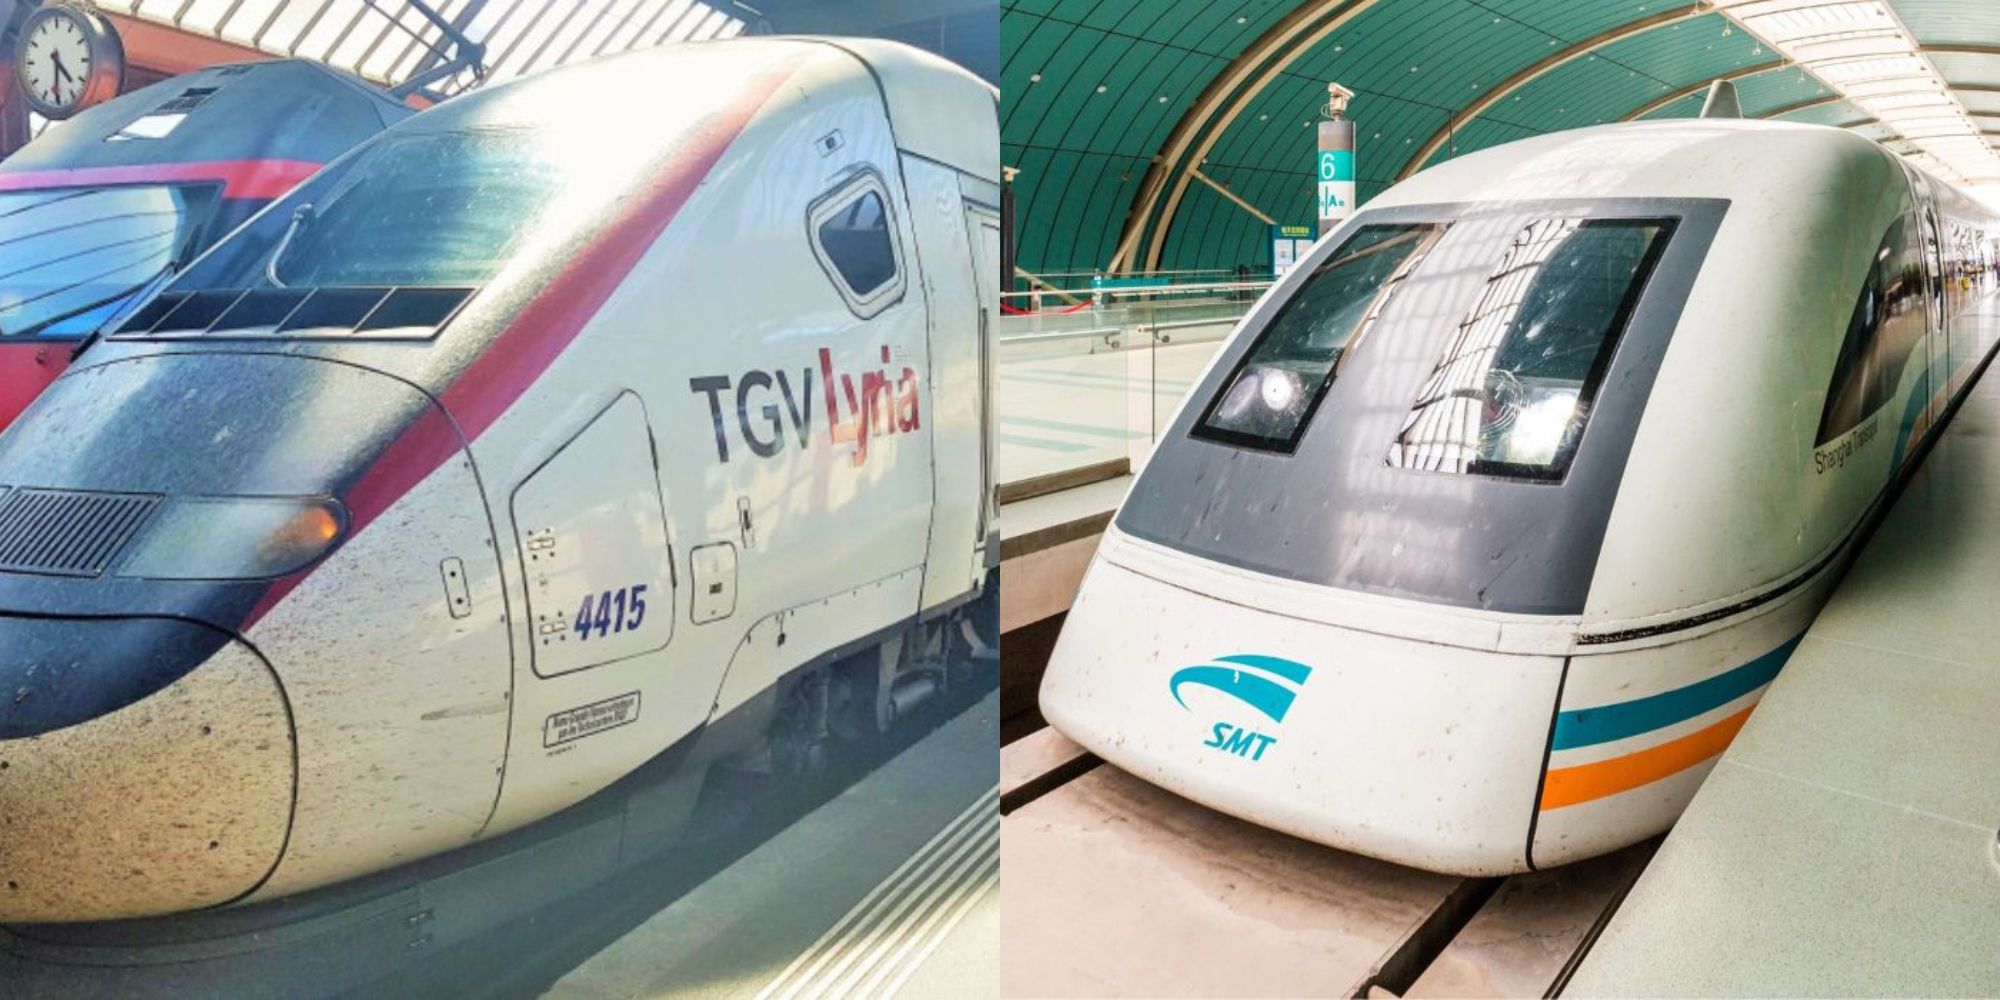 Split image showing the TGV POS and Shanghai Maglev trains.